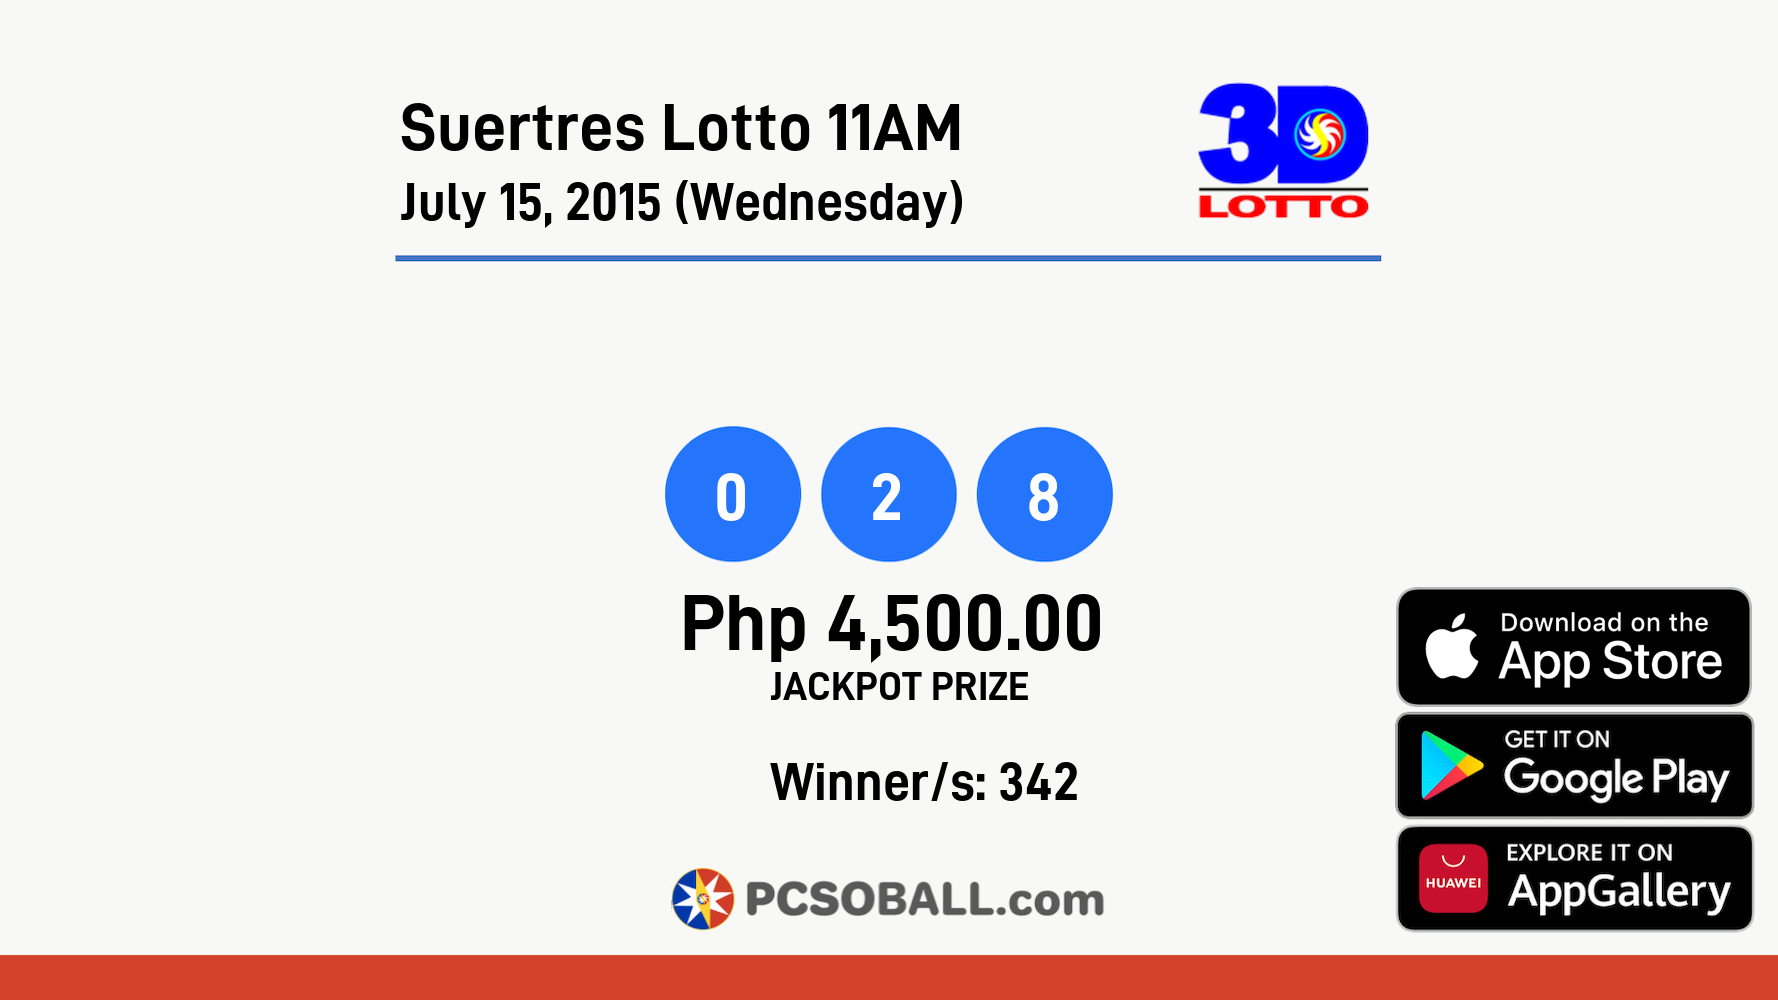 Suertres Lotto 11AM July 15, 2015 (Wednesday) Result